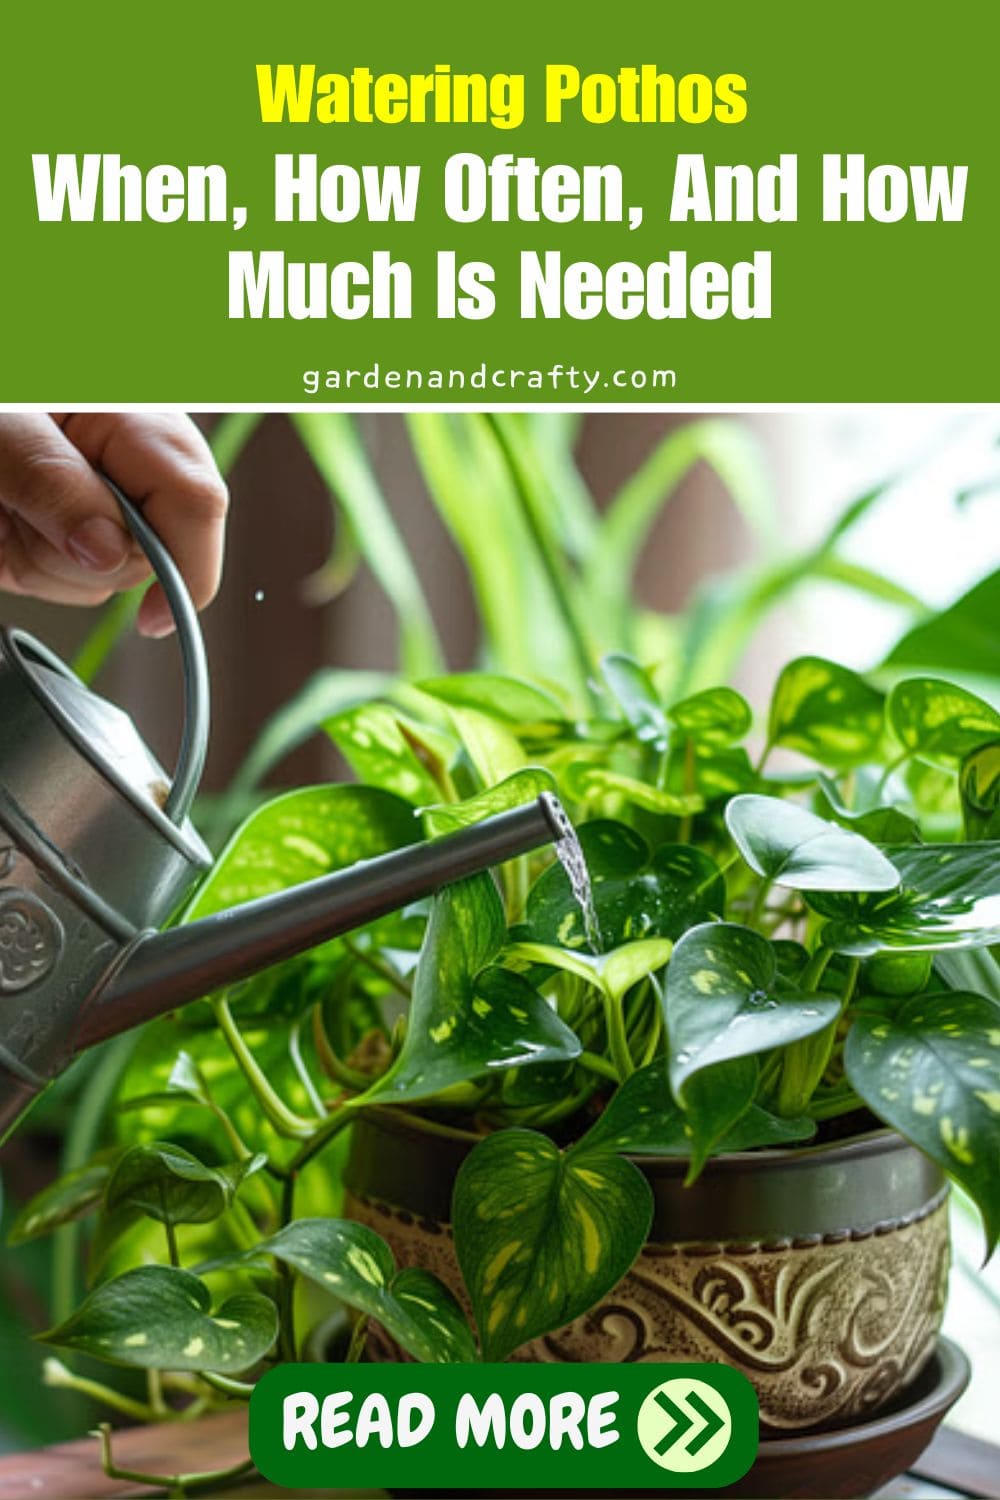 Watering Pothos: When, How Often, And How Much Is Needed